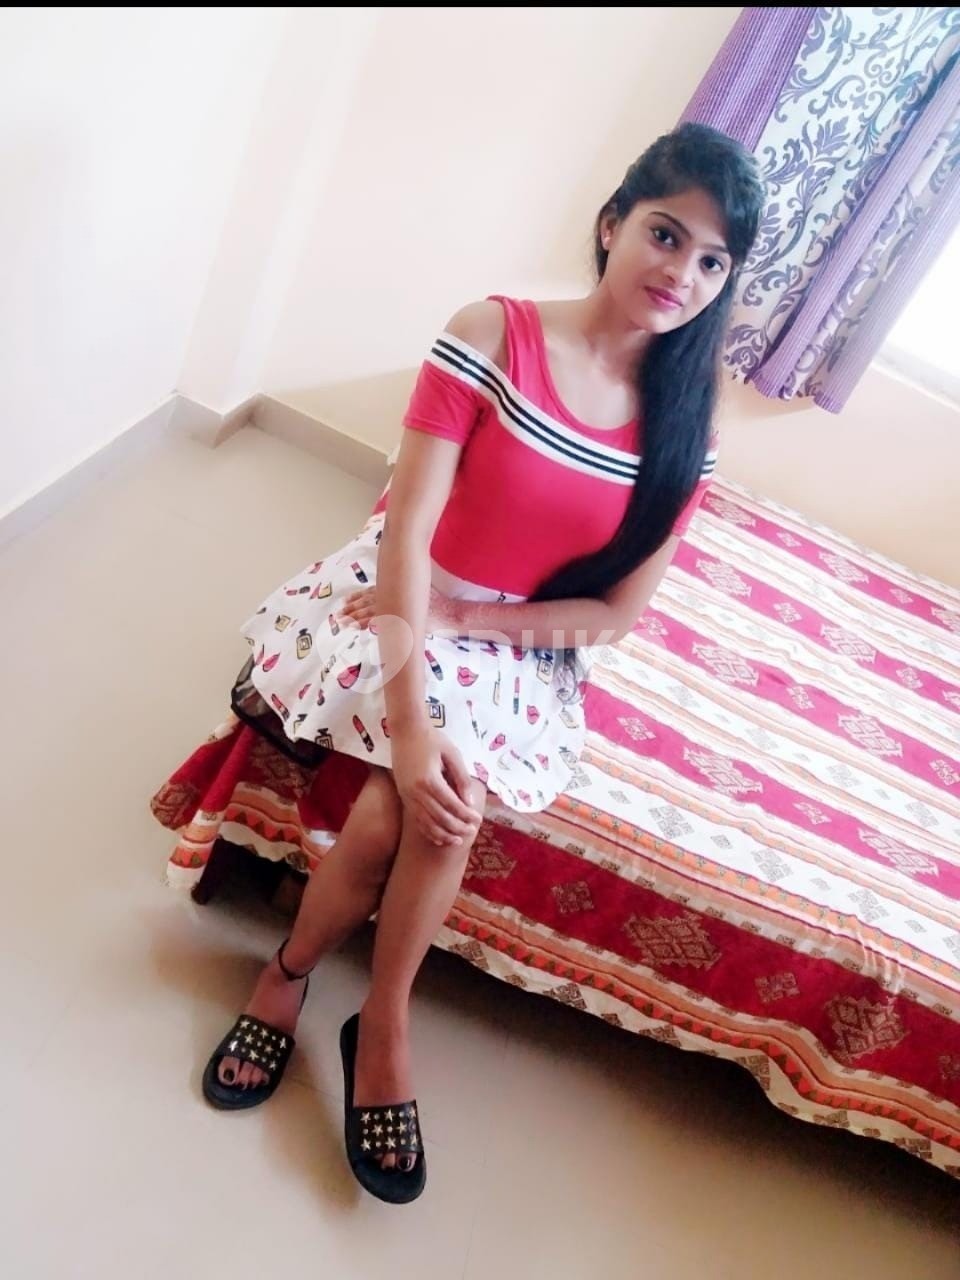 Chennai ,✅ MYSELF VIDYA ☎️ ESCORT SERVICE TAMIL INDIPENDENT DOORSTEP GIRL HOUSEWIFE COLLEGE FULL SAFE AND SECURE S